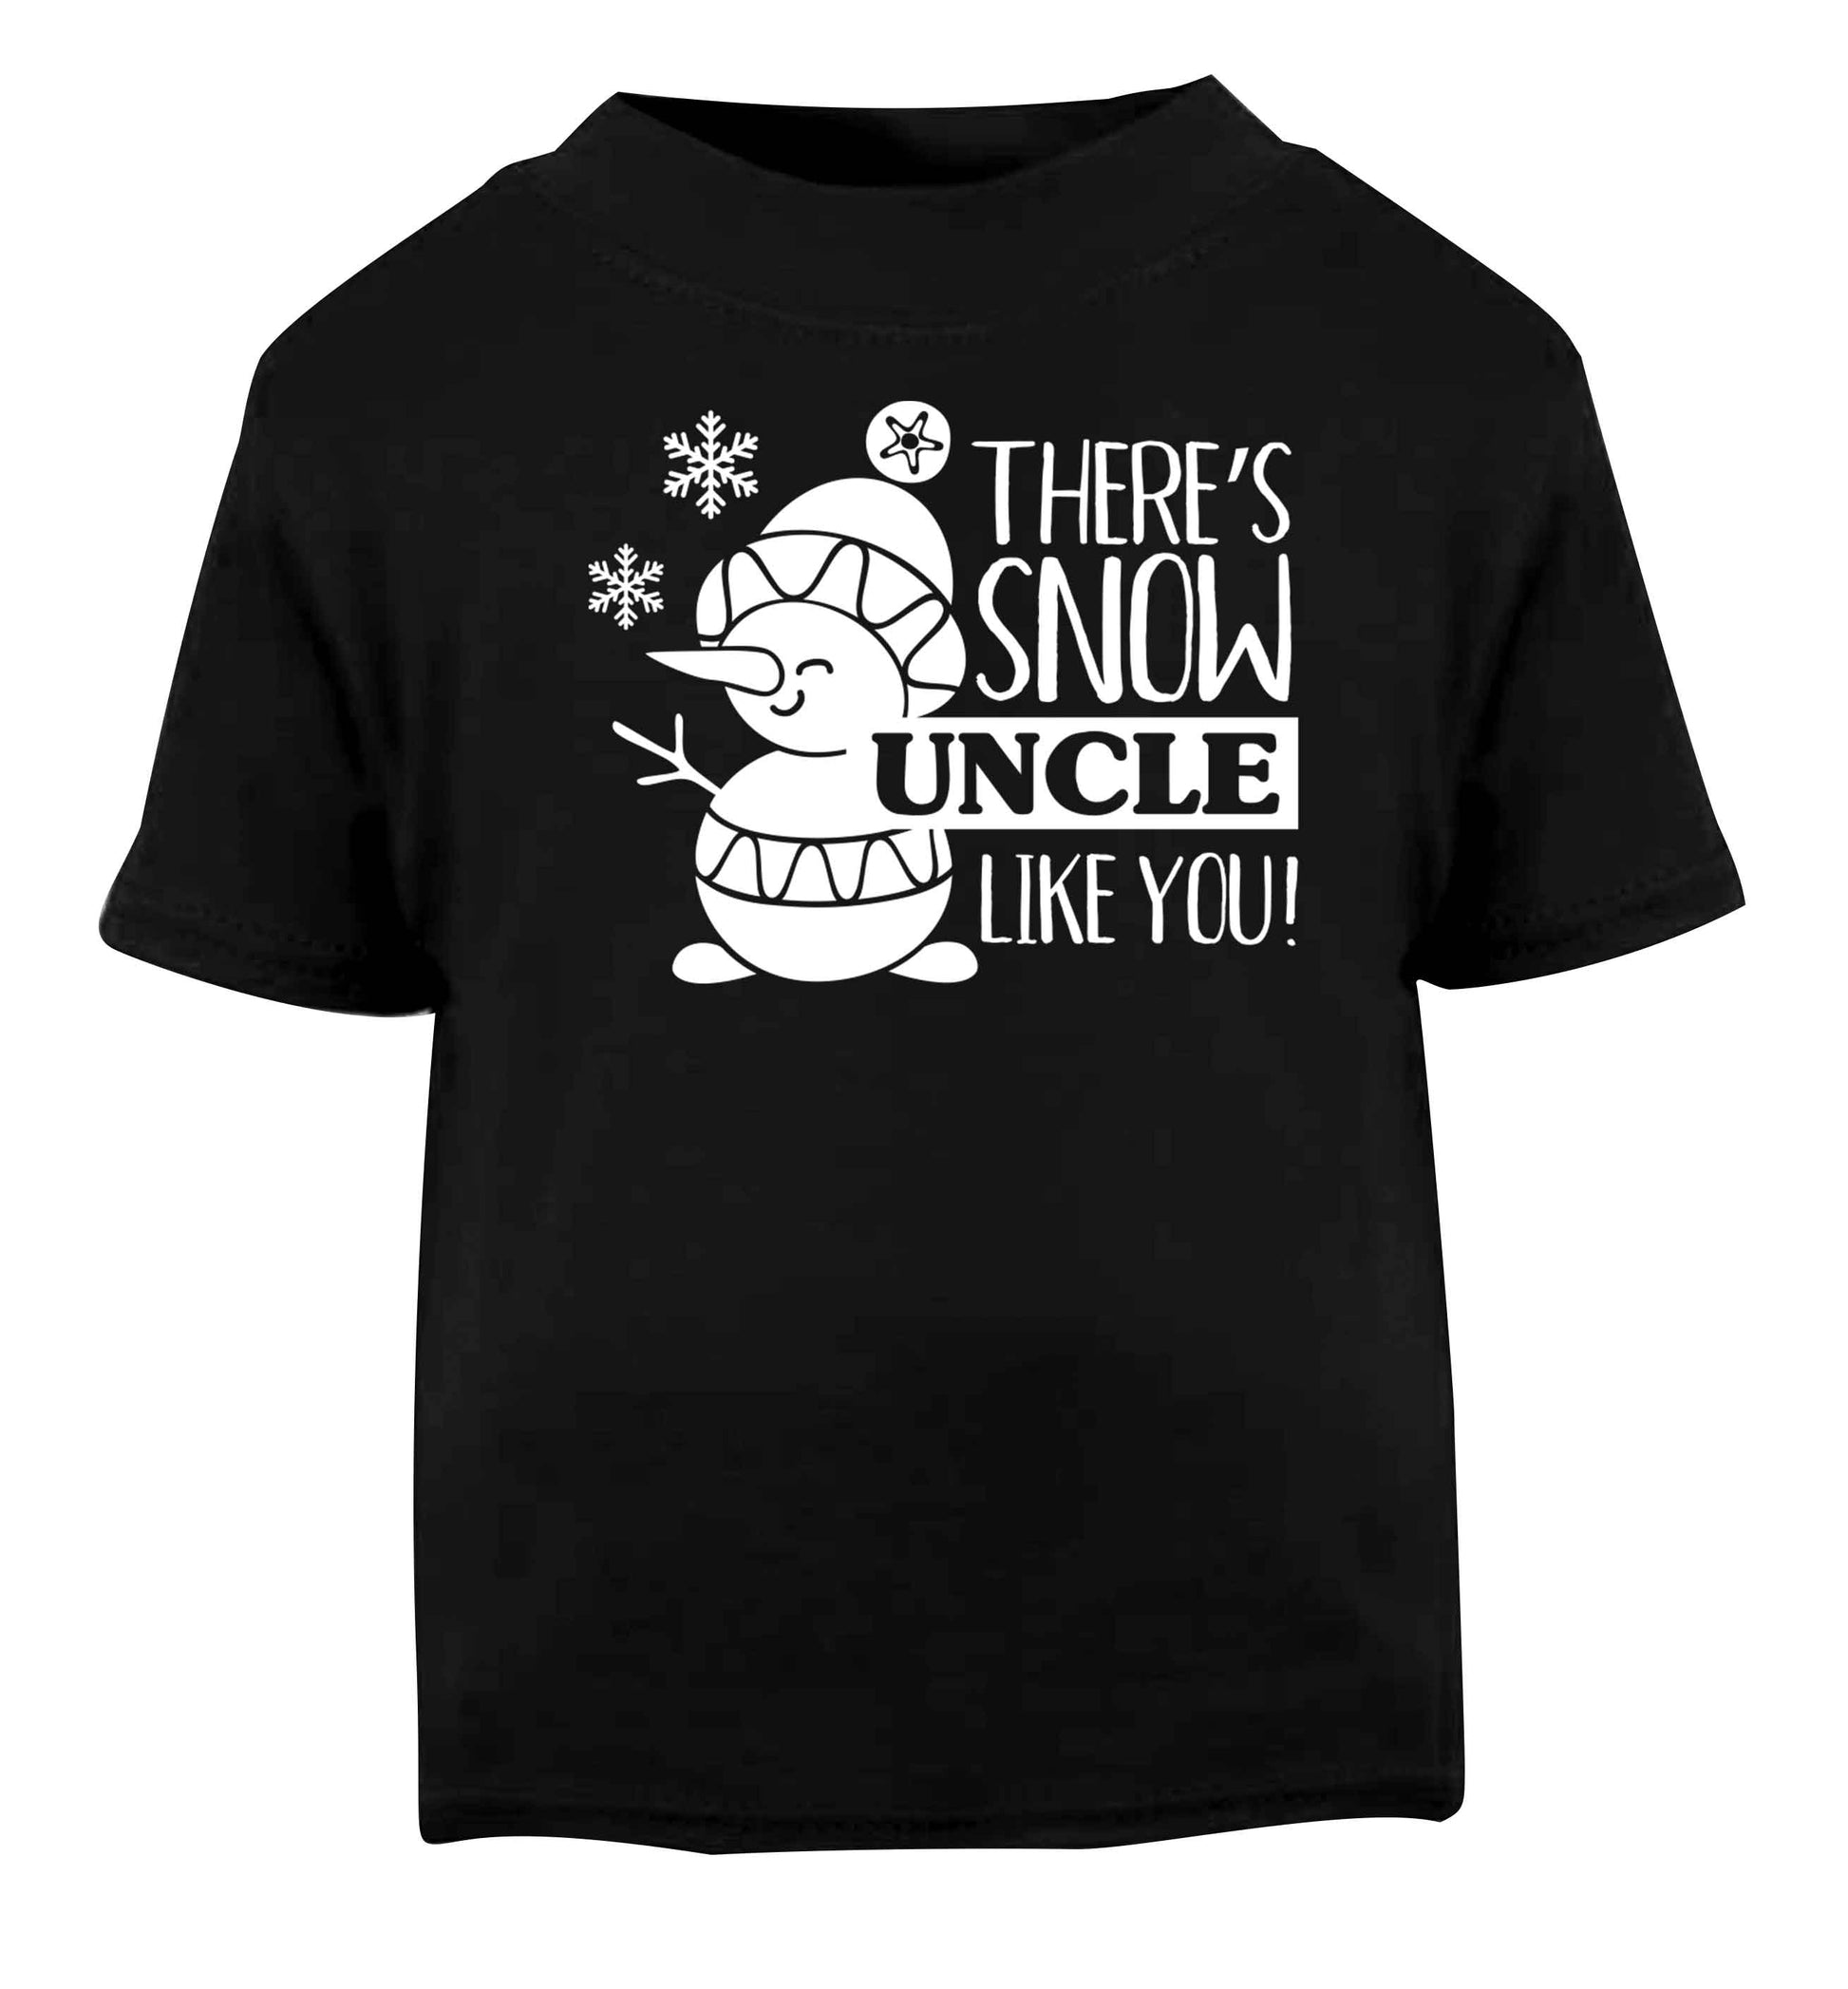 There's snow uncle like you Black baby toddler Tshirt 2 years